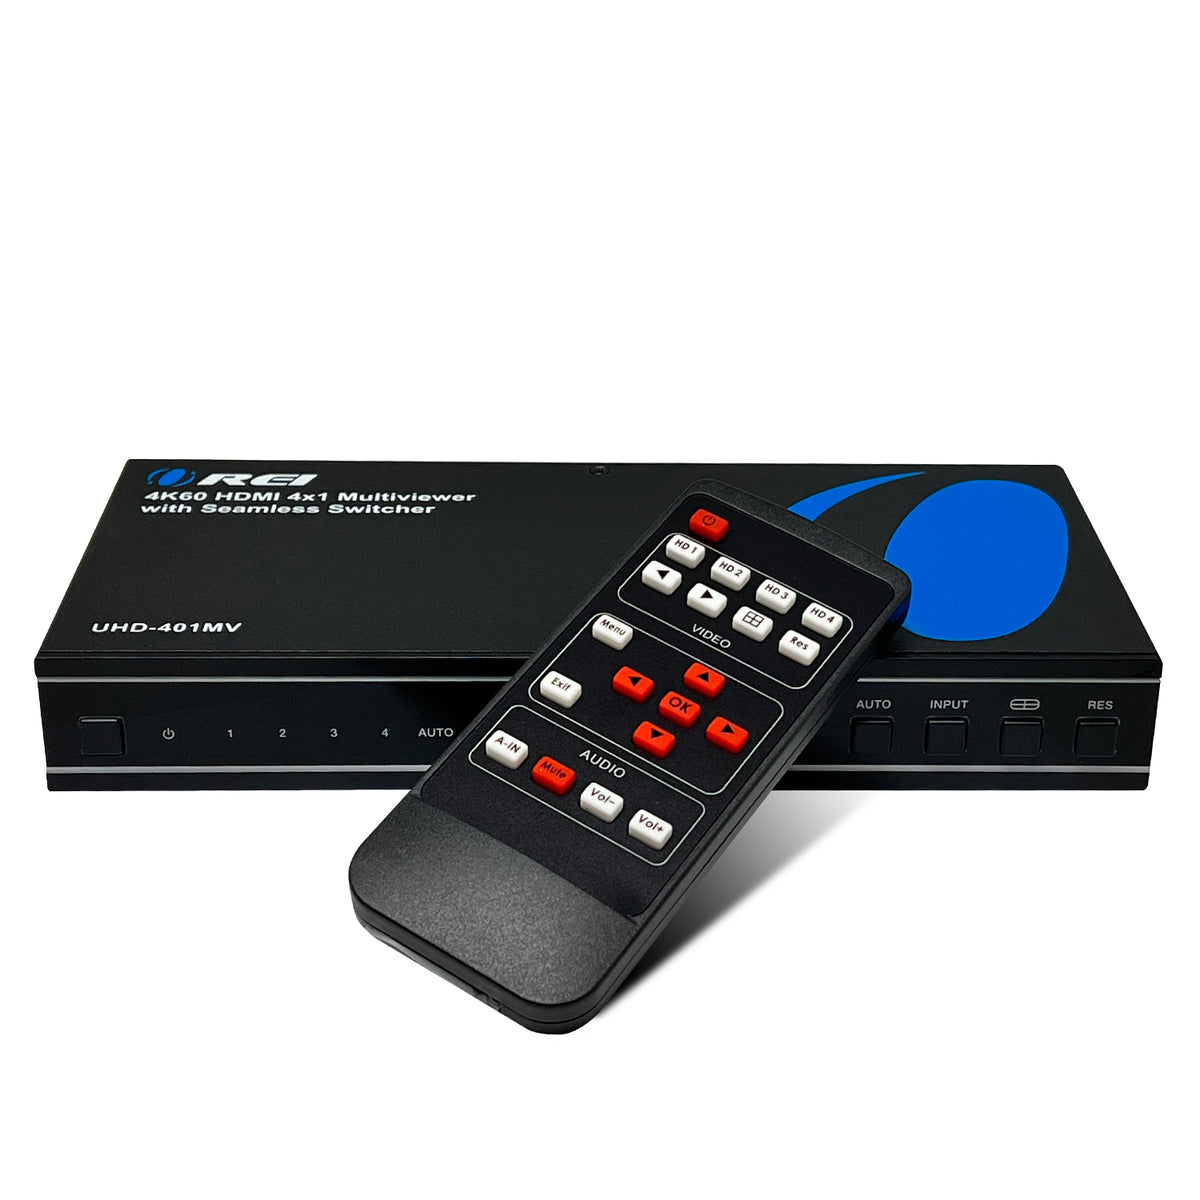 Shop The Best Multiviewer Switch Devices on the Market Online